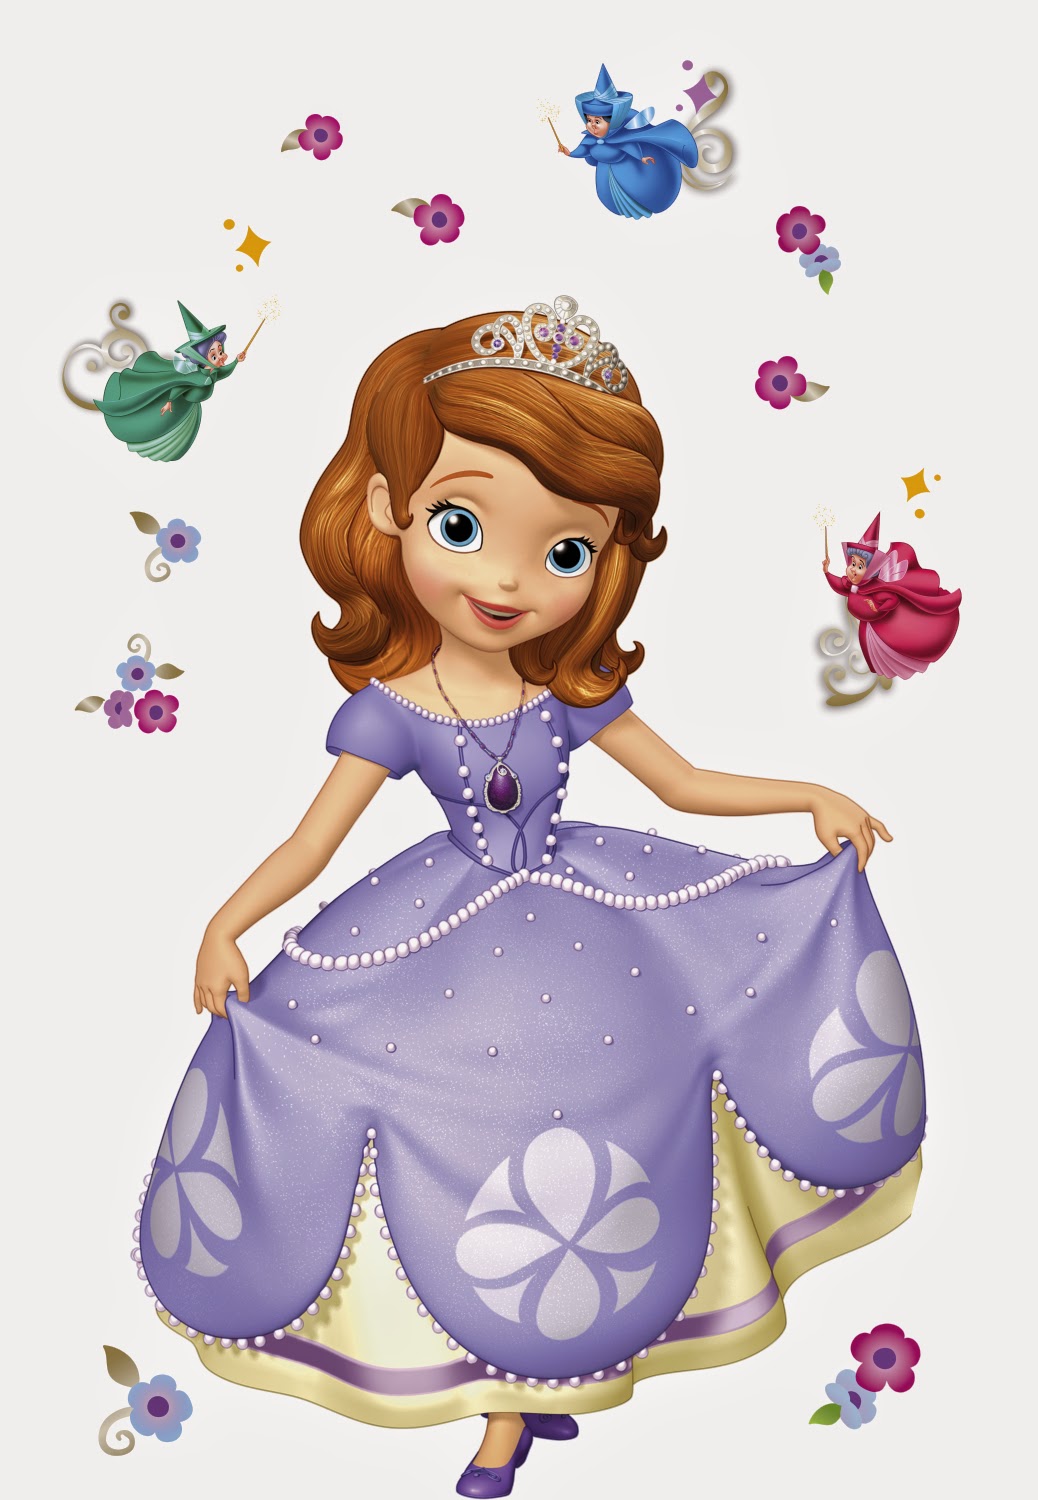 Sofia The First Wallpaper - Sofia The First , HD Wallpaper & Backgrounds